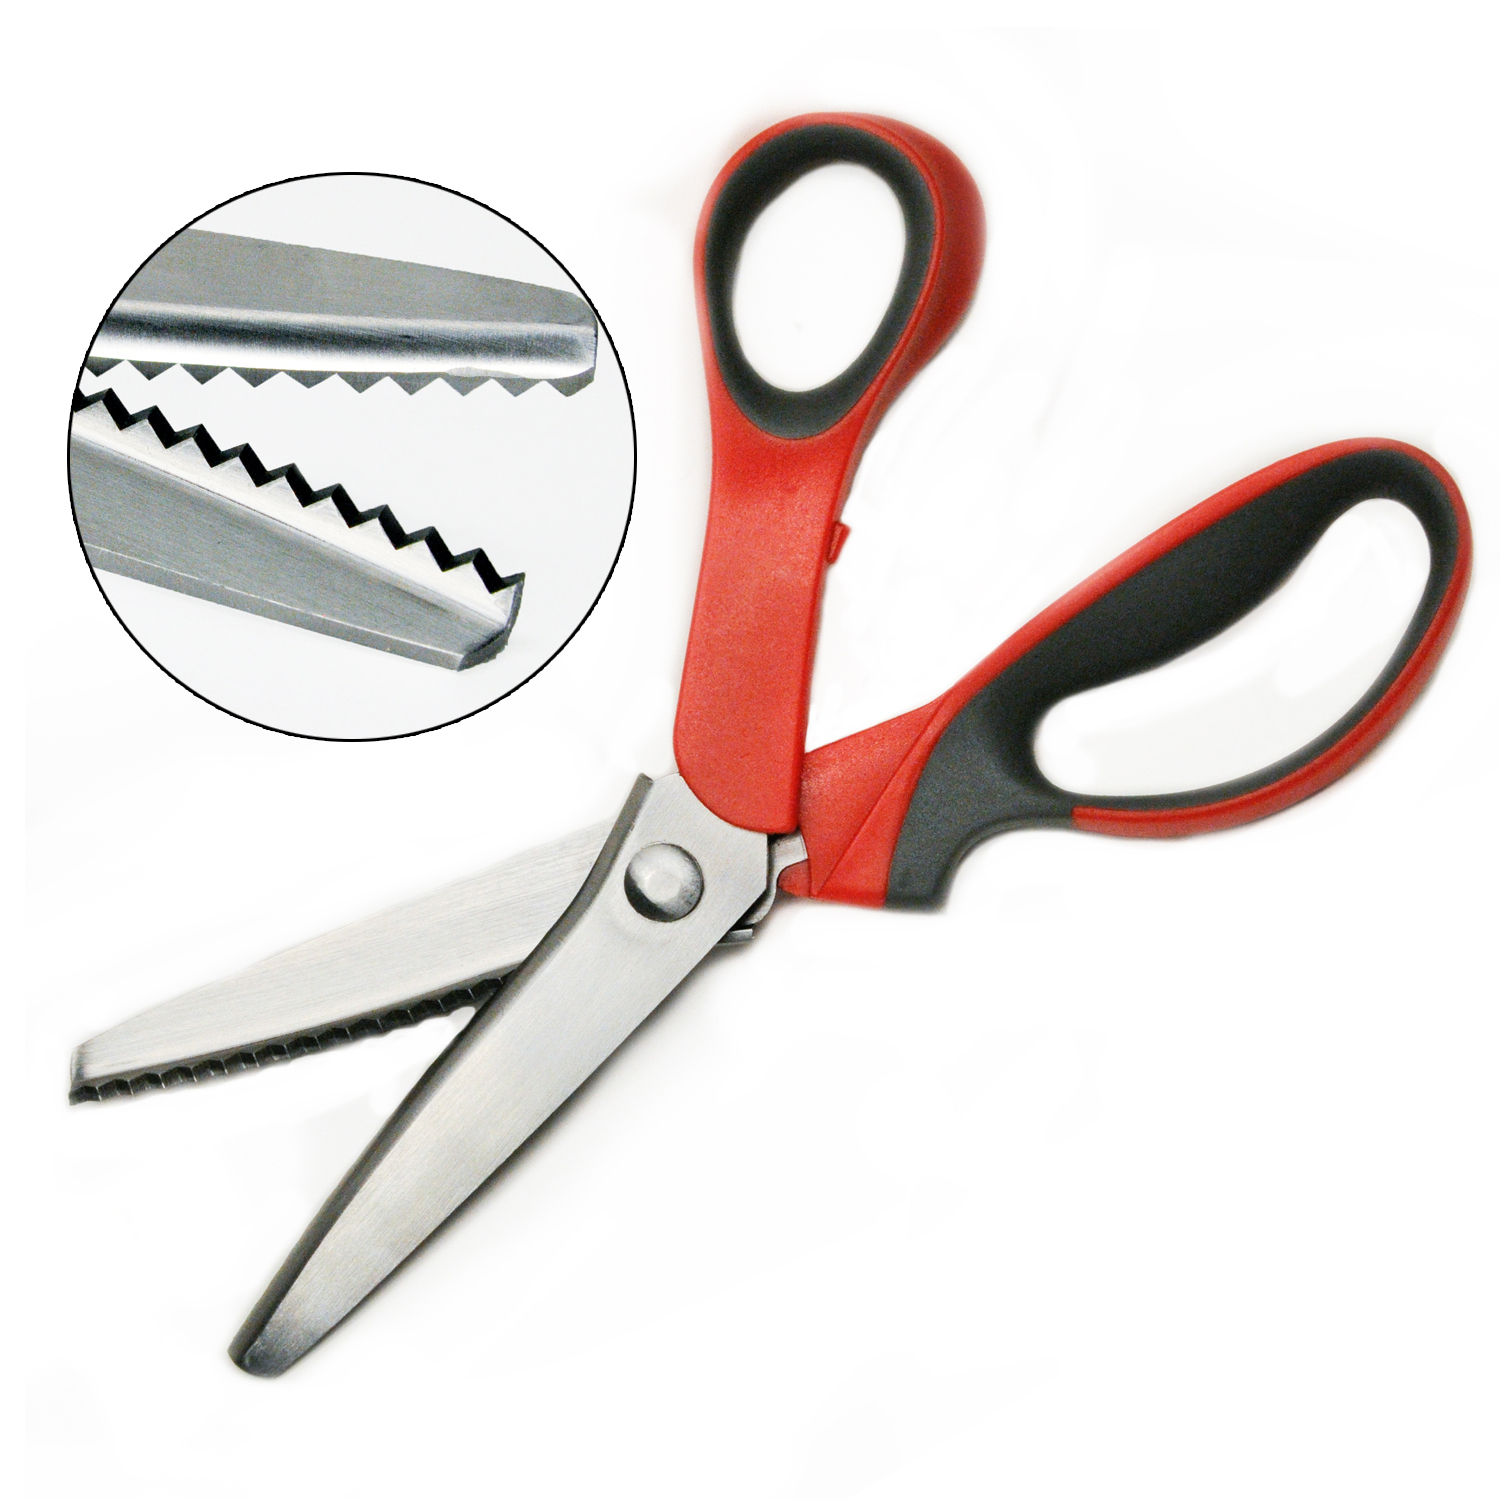 What Are Pinking Shears Used For?